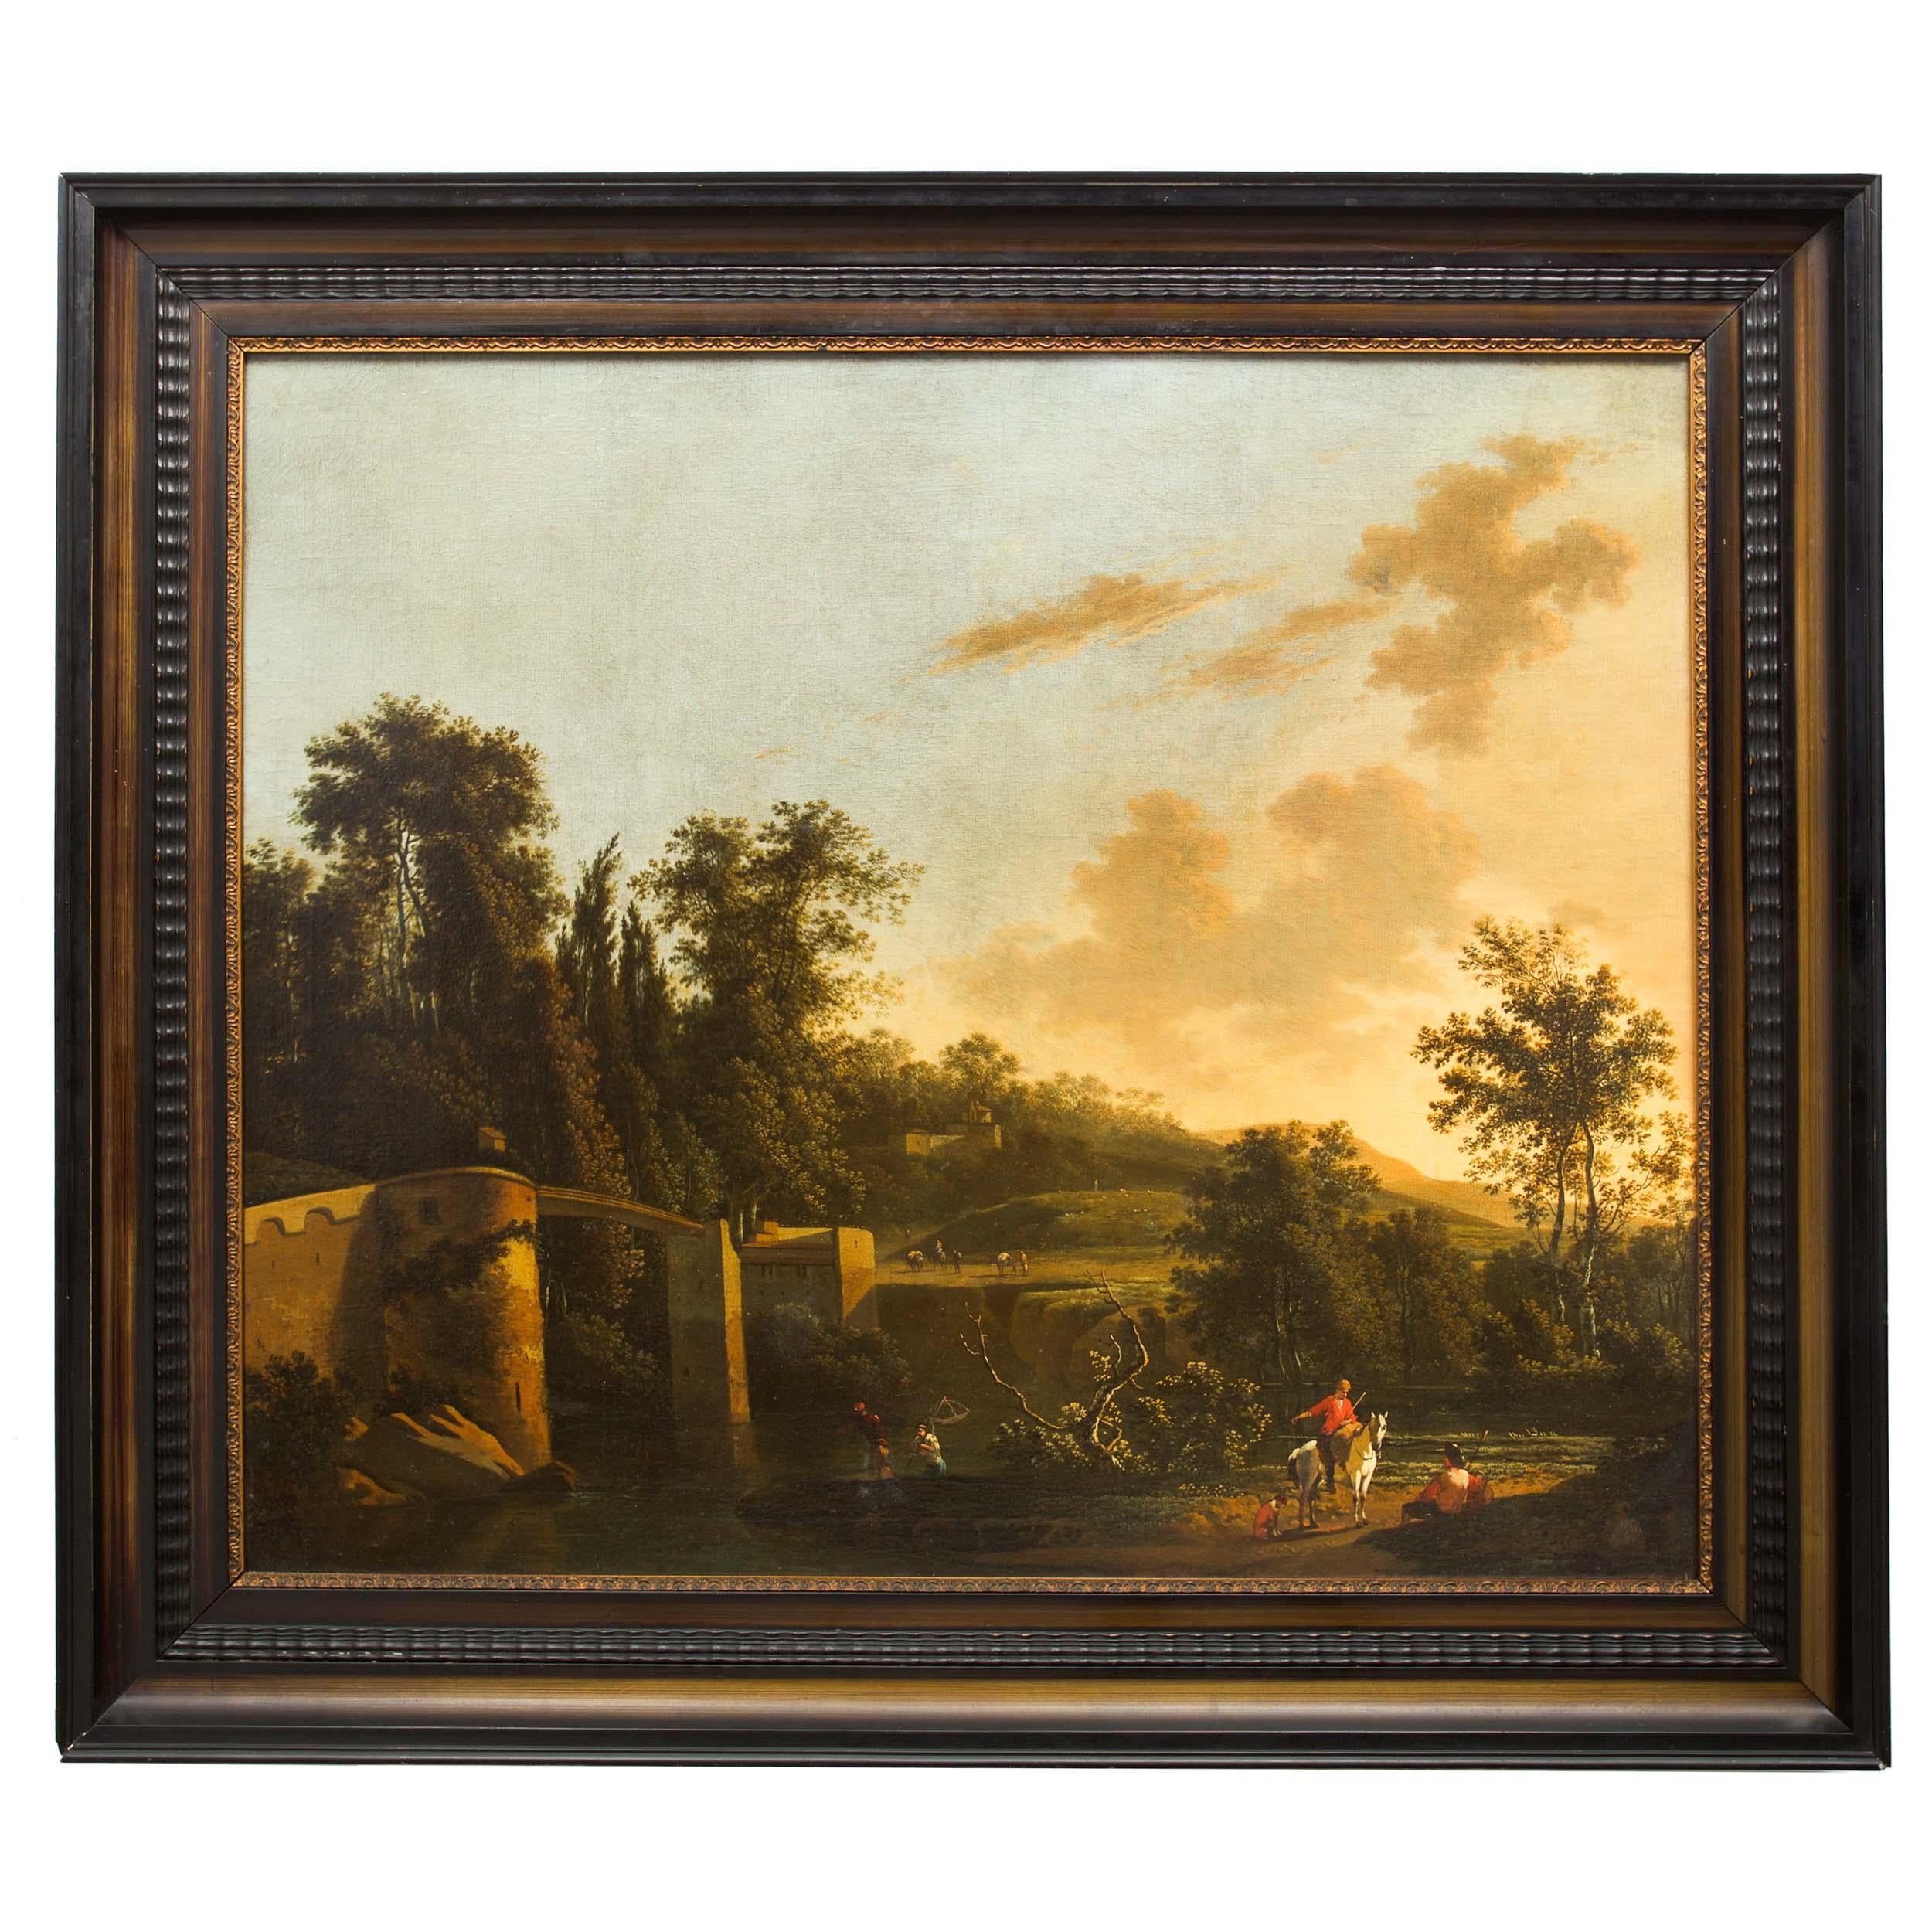 An exquisite sweeping landscape of the Italian countryside with bright blue skies in a gentle gradation towards a golden hue brought on by the nearly setting sun. Fishermen are busy at work in the river while a gentleman on horseback converses with